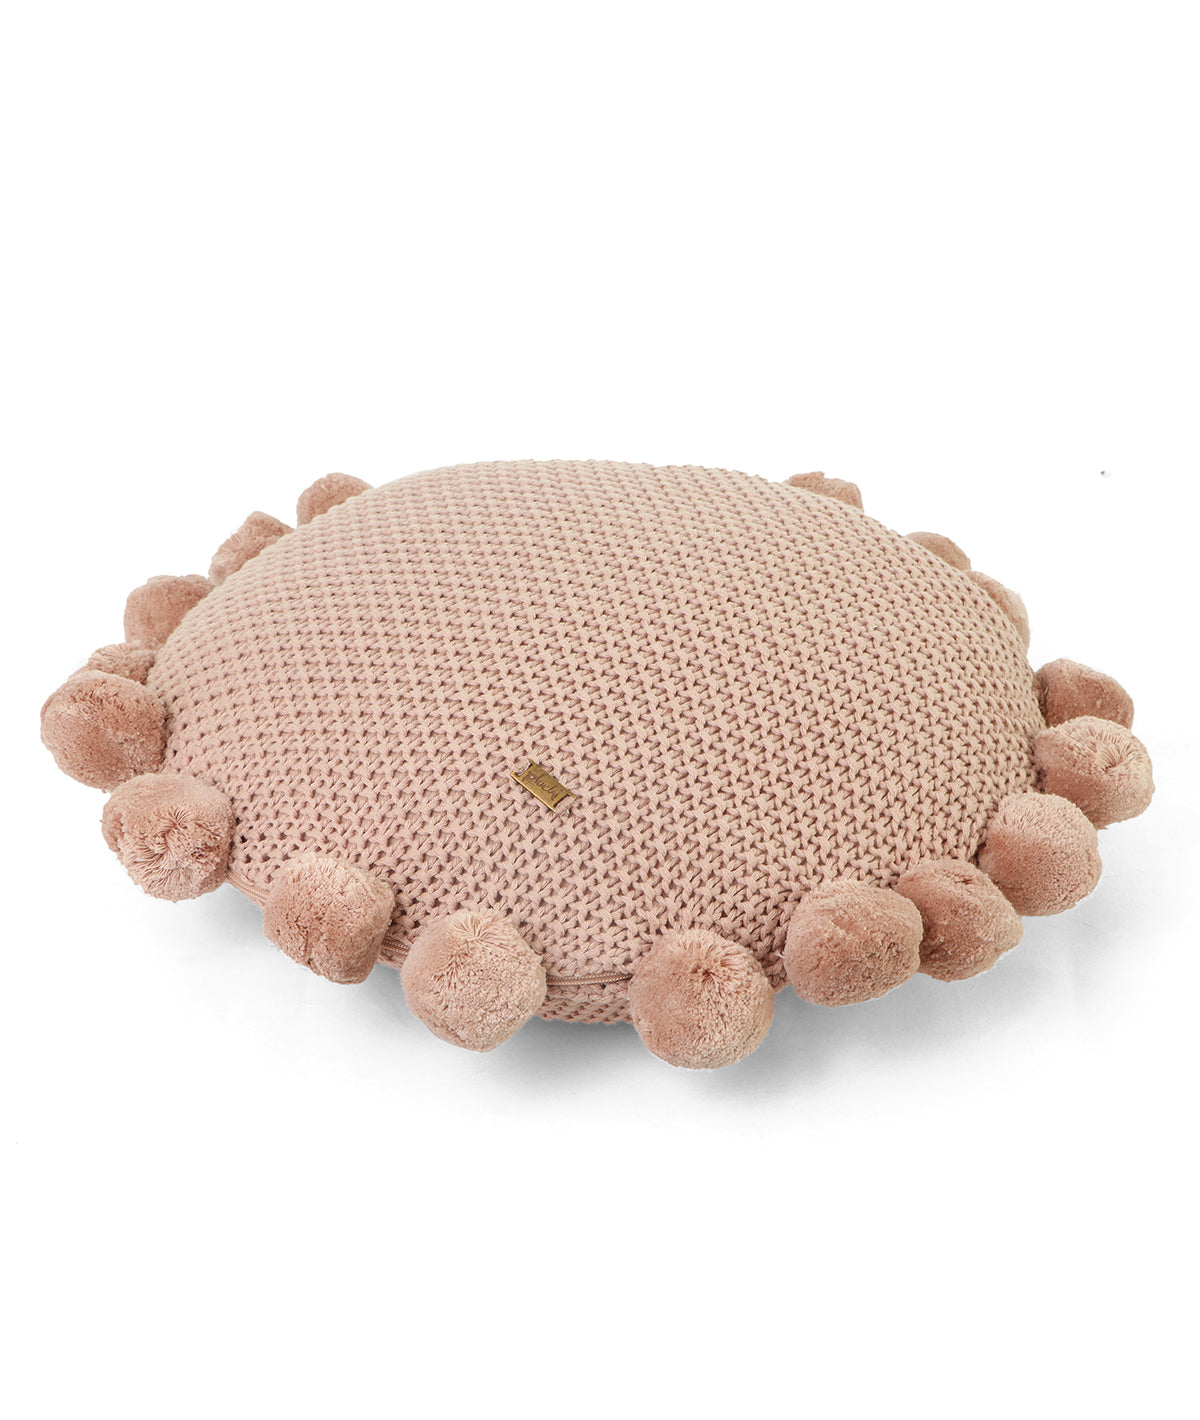 Pom Pom Crepe Cotton Knitted Decorative 16 Inches Dia Cushion Cover